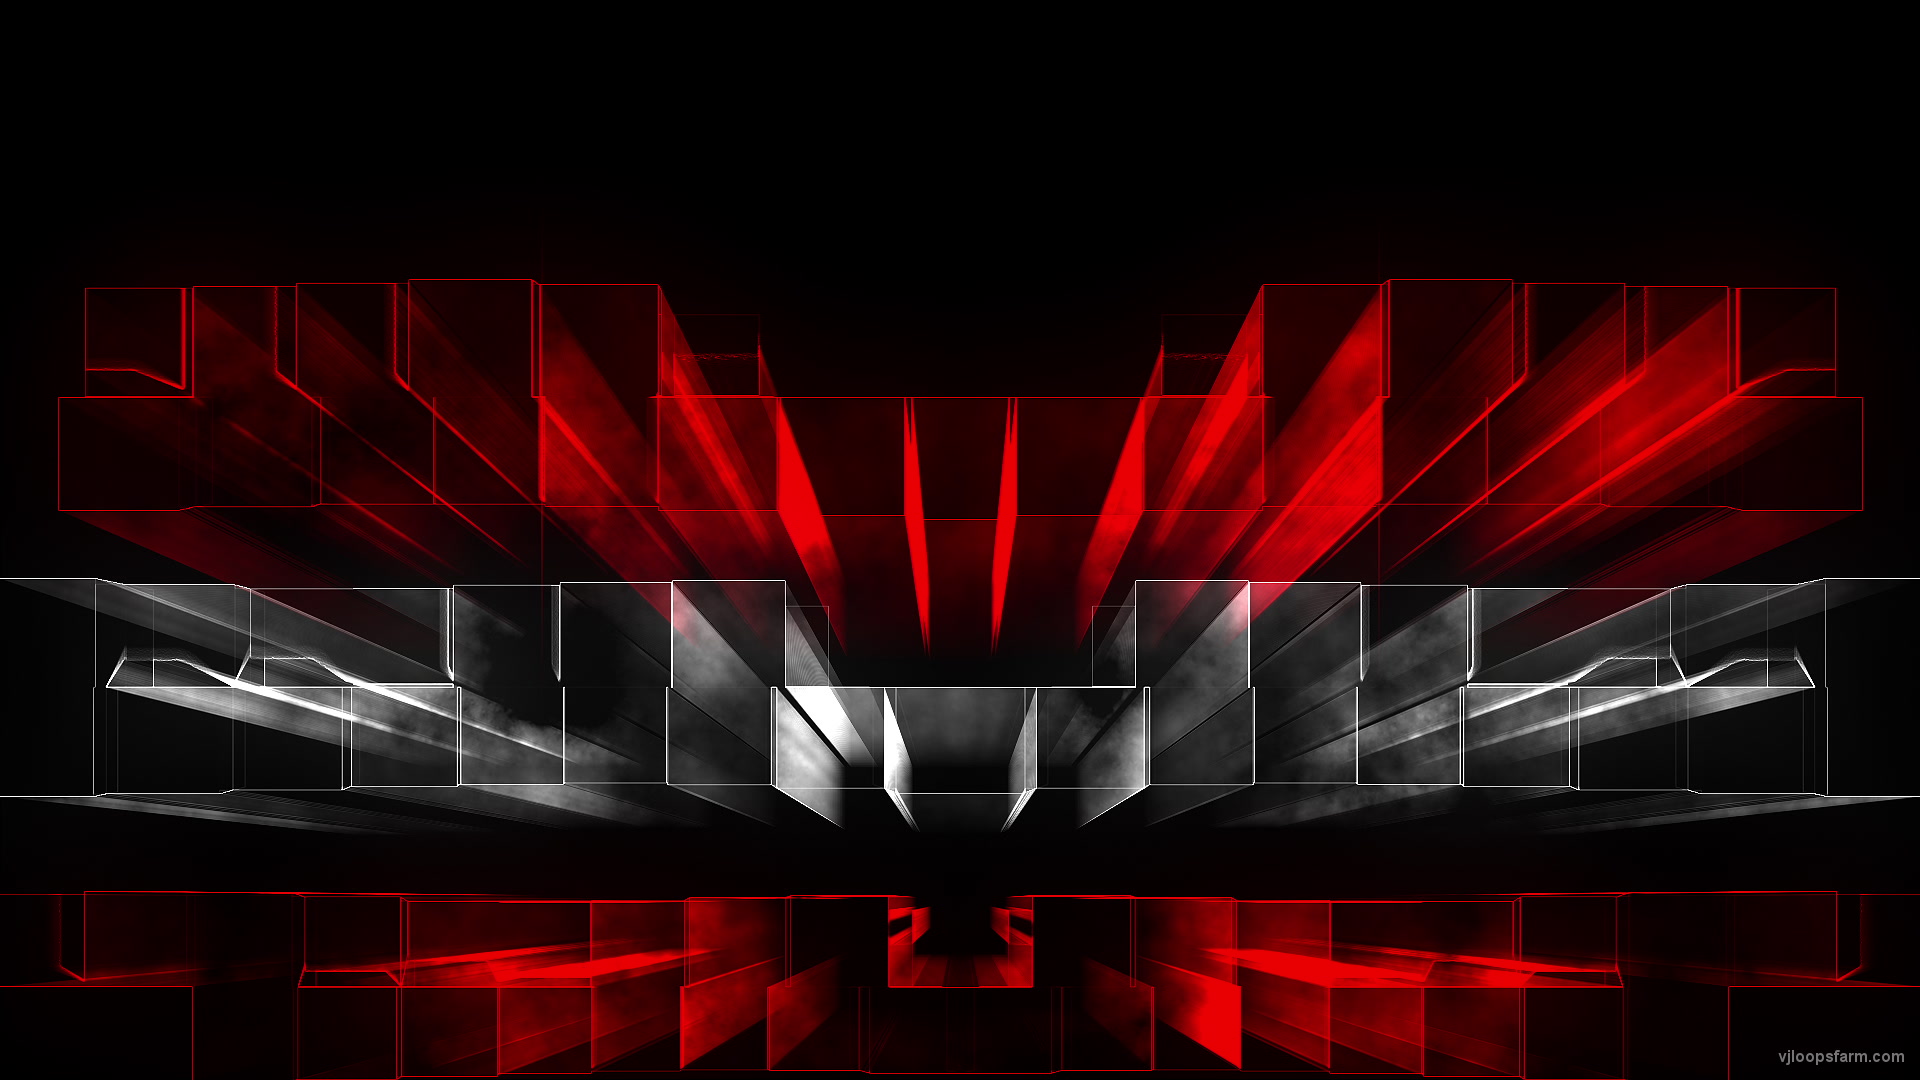 Rot-Weiss-Rot Square Lines Pattern Video Art VJ Loop